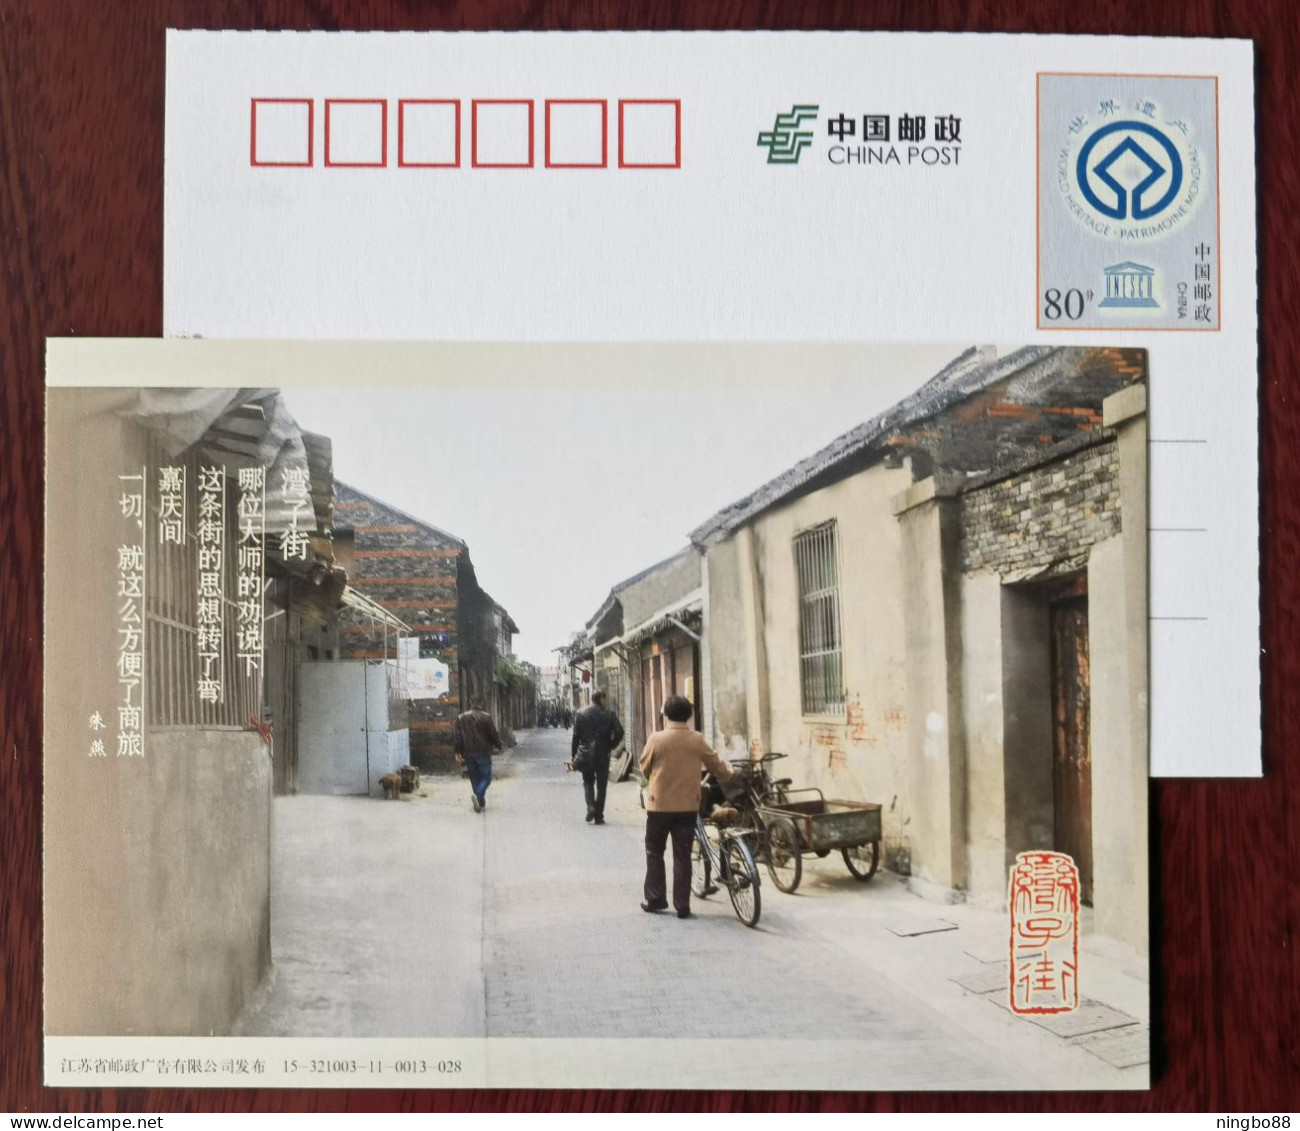 Street Pushing Bicycle,Tricycle,China 2015 Grand Canal Dongguan Ancient Ferry UNESCO World Heritage Pre-stamped Card - Wielrennen